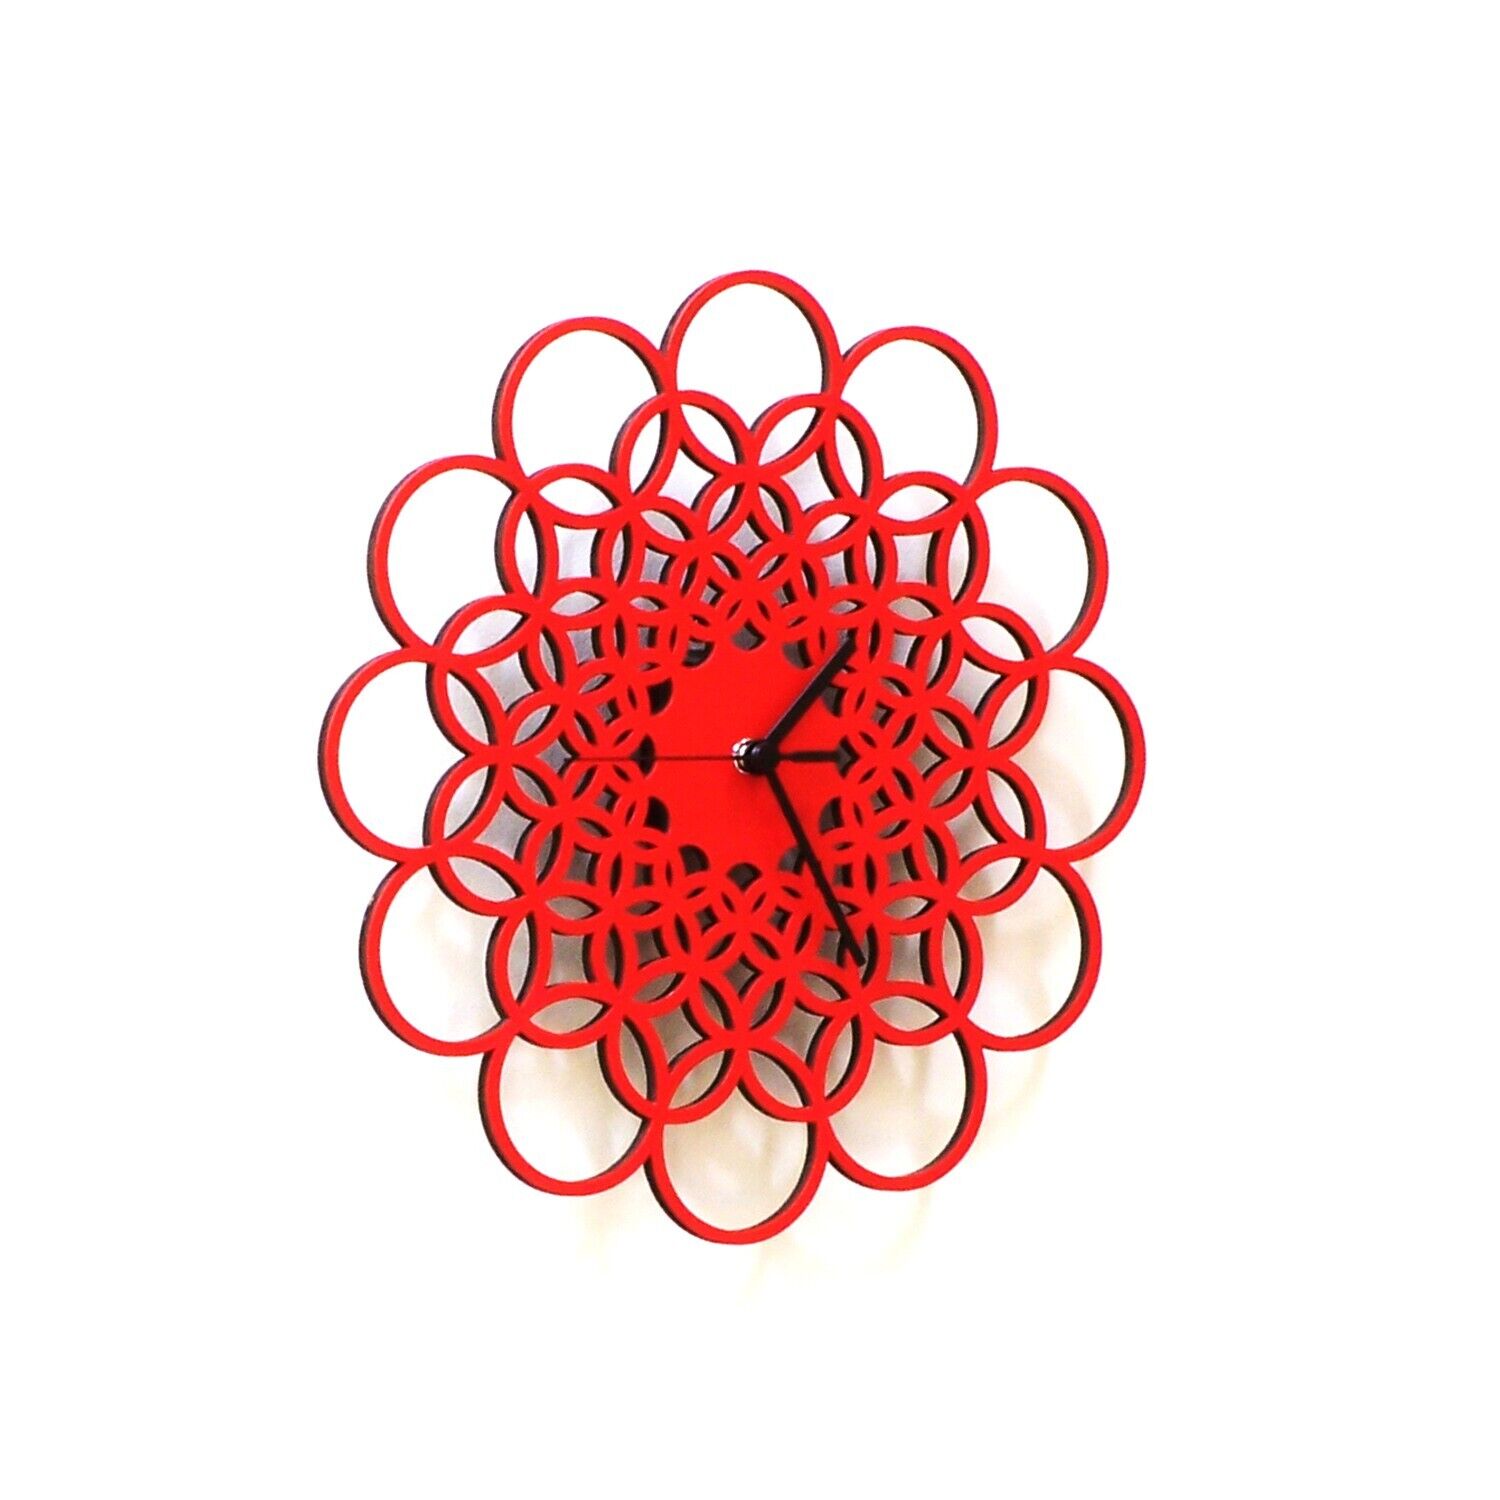 Handmade geometric wall clock with hand painted delicate dial - Rings red